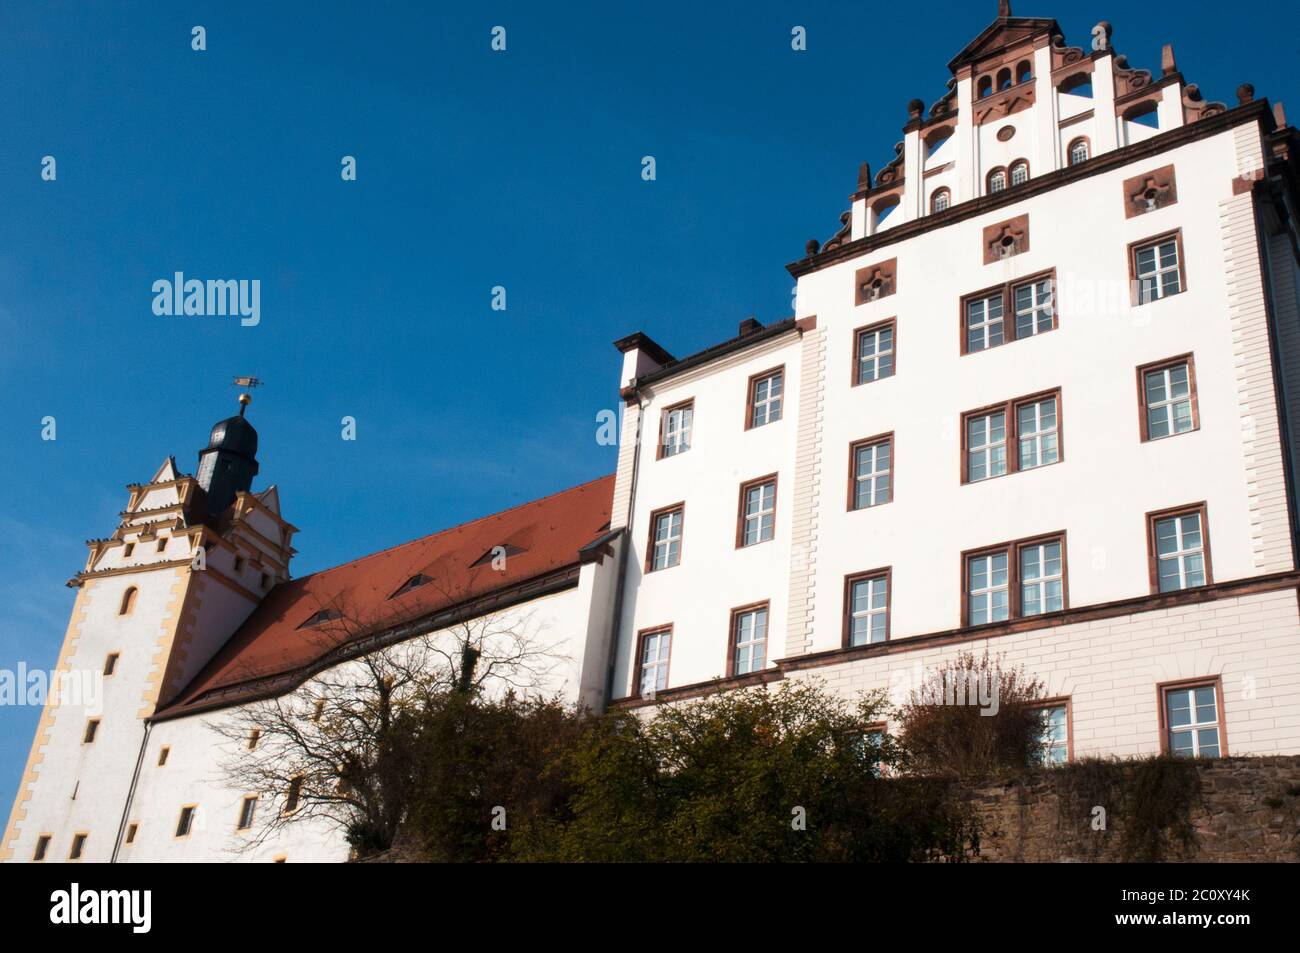 Colditz Castle in Saxony housed a notable German prisoner-of-war camp for captured enemy officers during World War II. Many attempted to escape. Stock Photo